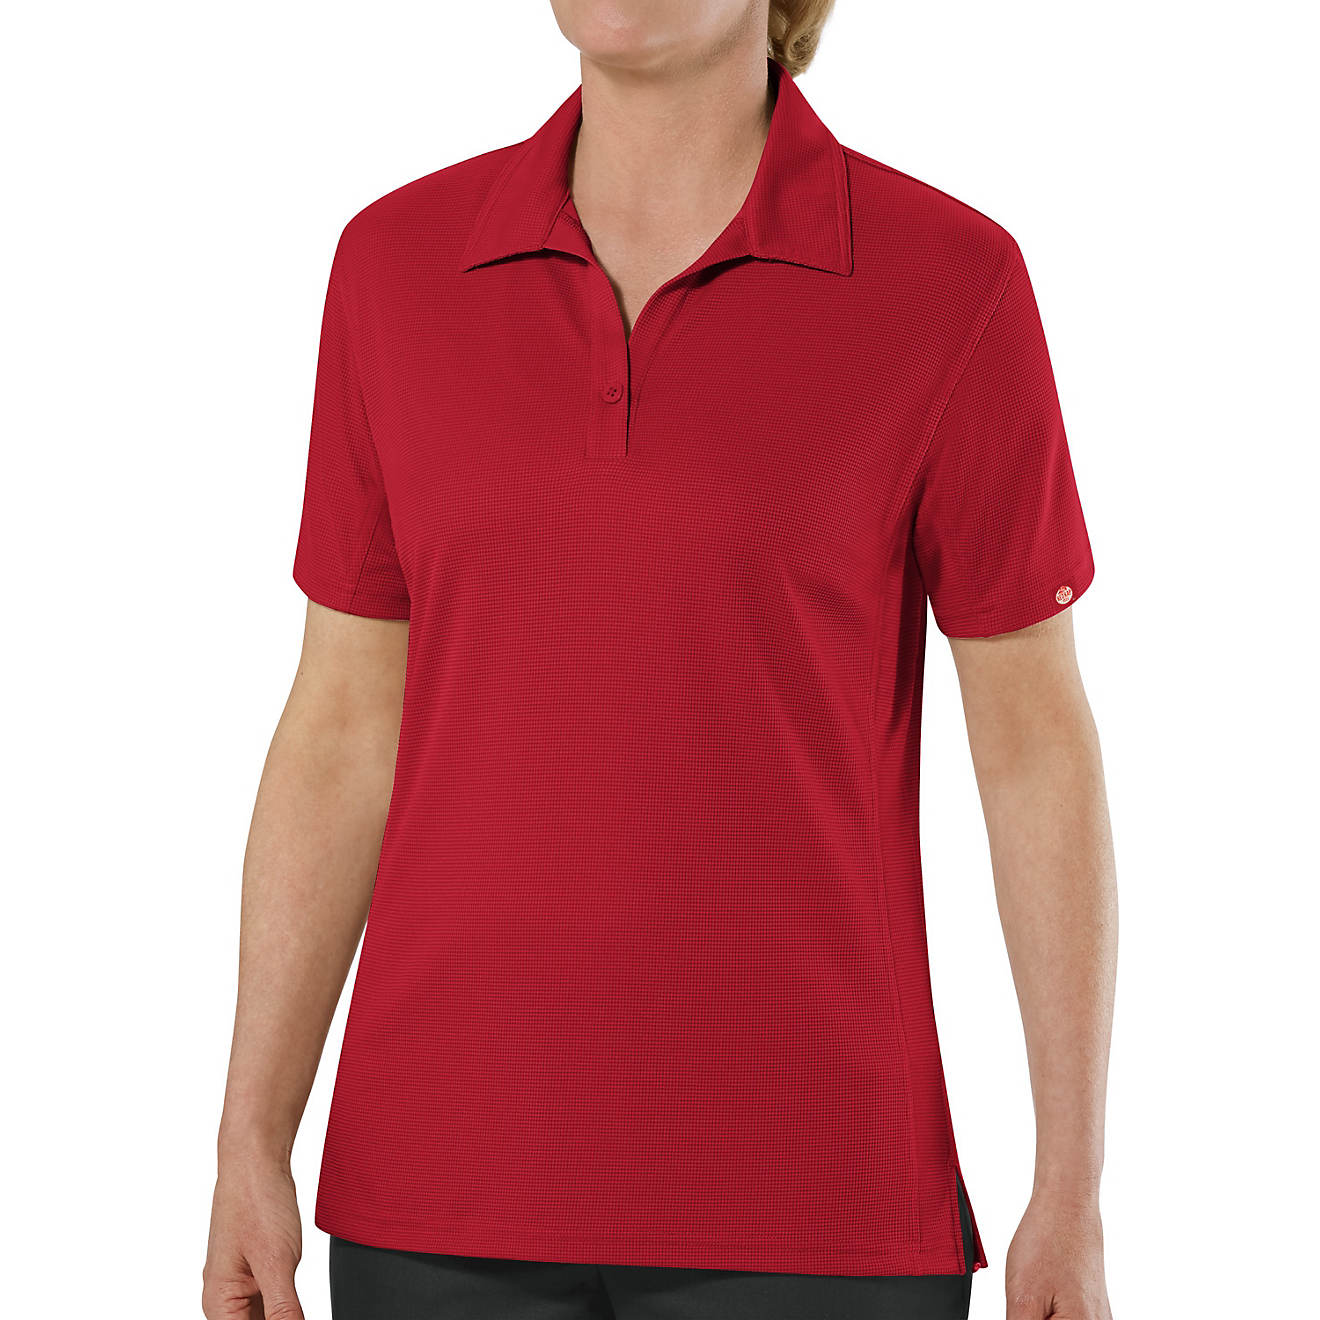 Red Kap Women's Performance Knit Flex Series Pro Polo                                                                            - view number 1